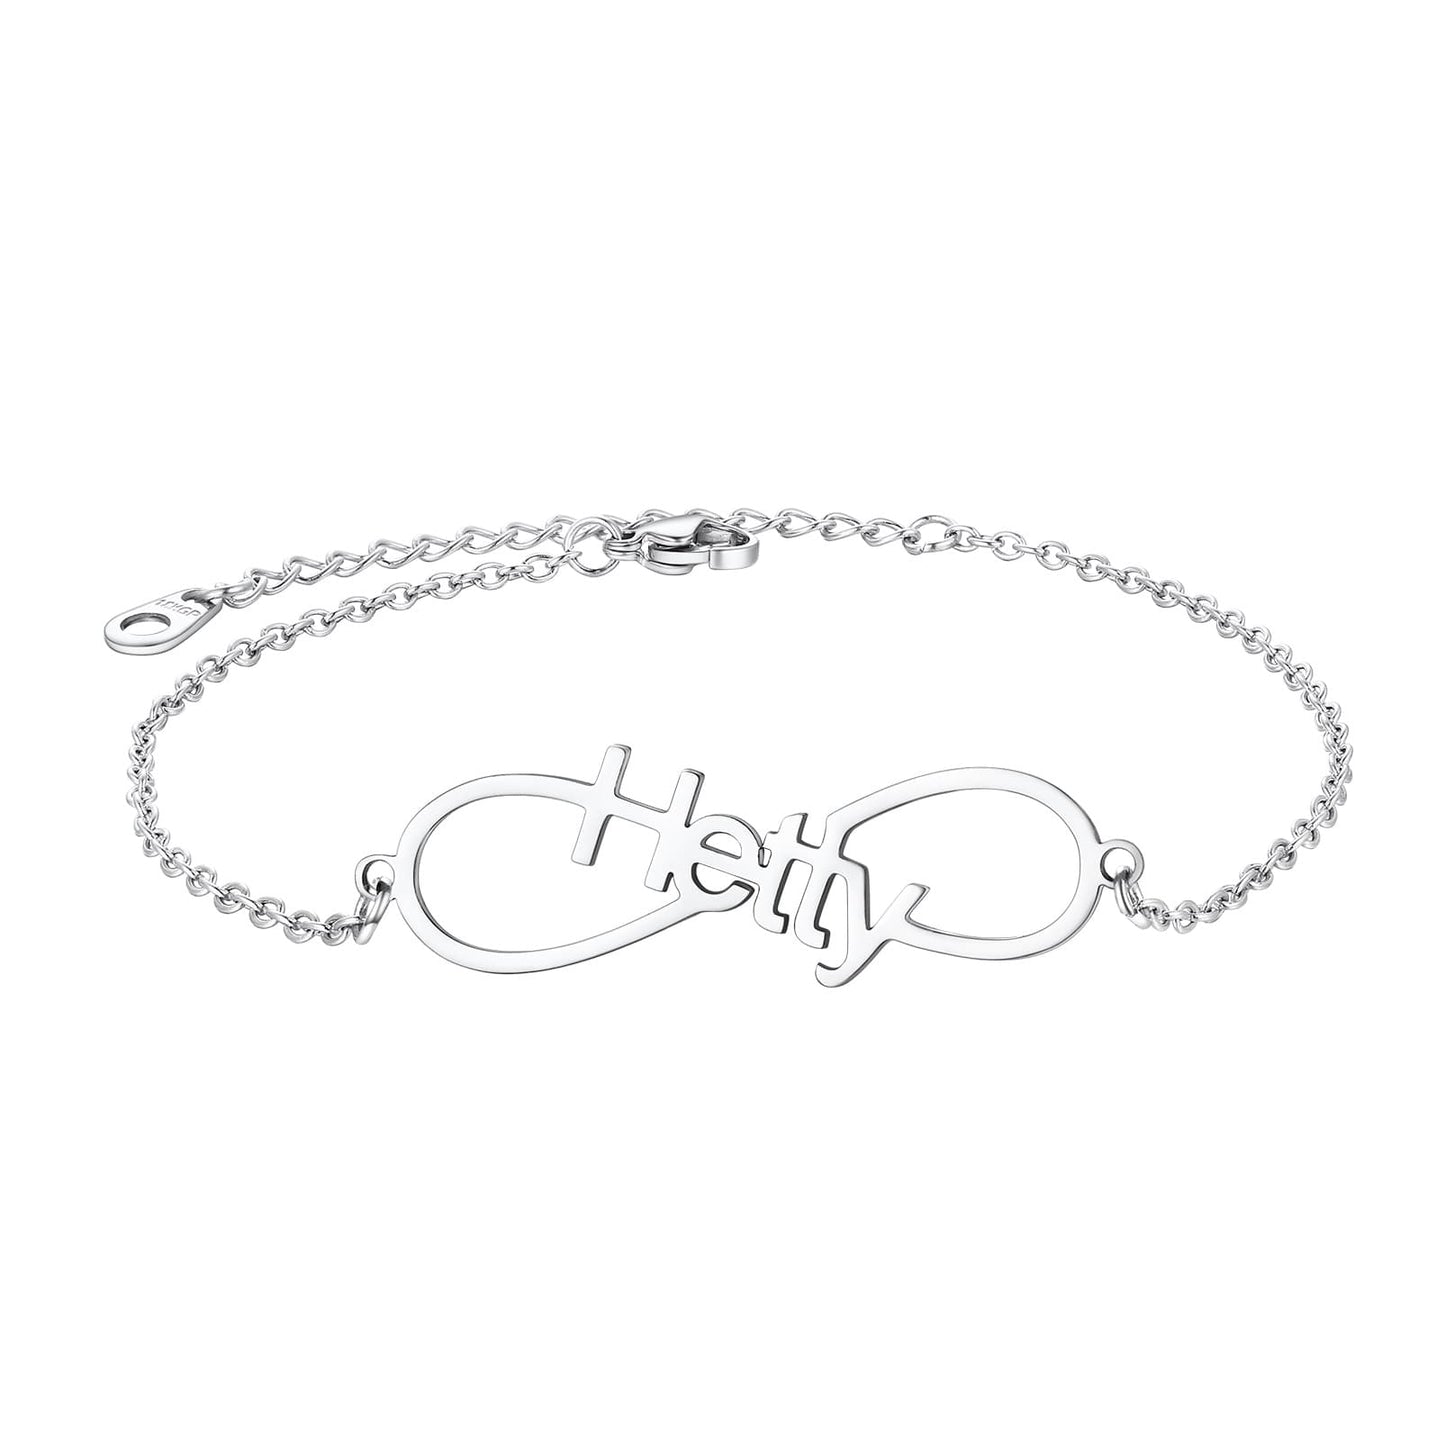 Personalized Name Anklet with Initials for Women